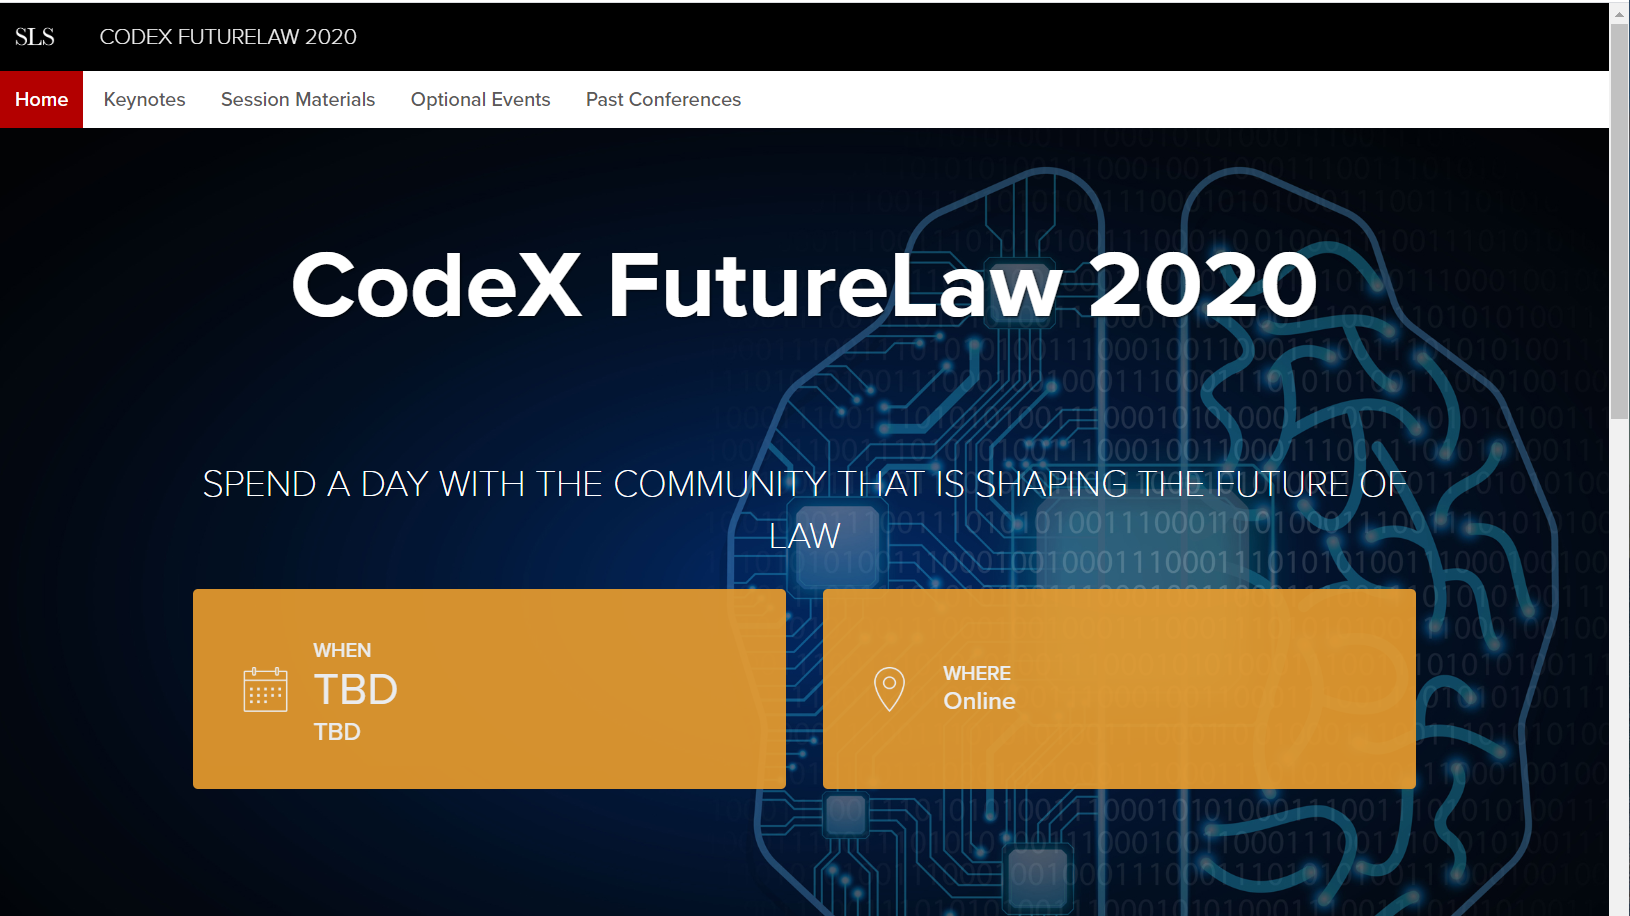 Stanford Cancels CodeX FutureLaw Conference Over Coronavirus Concerns